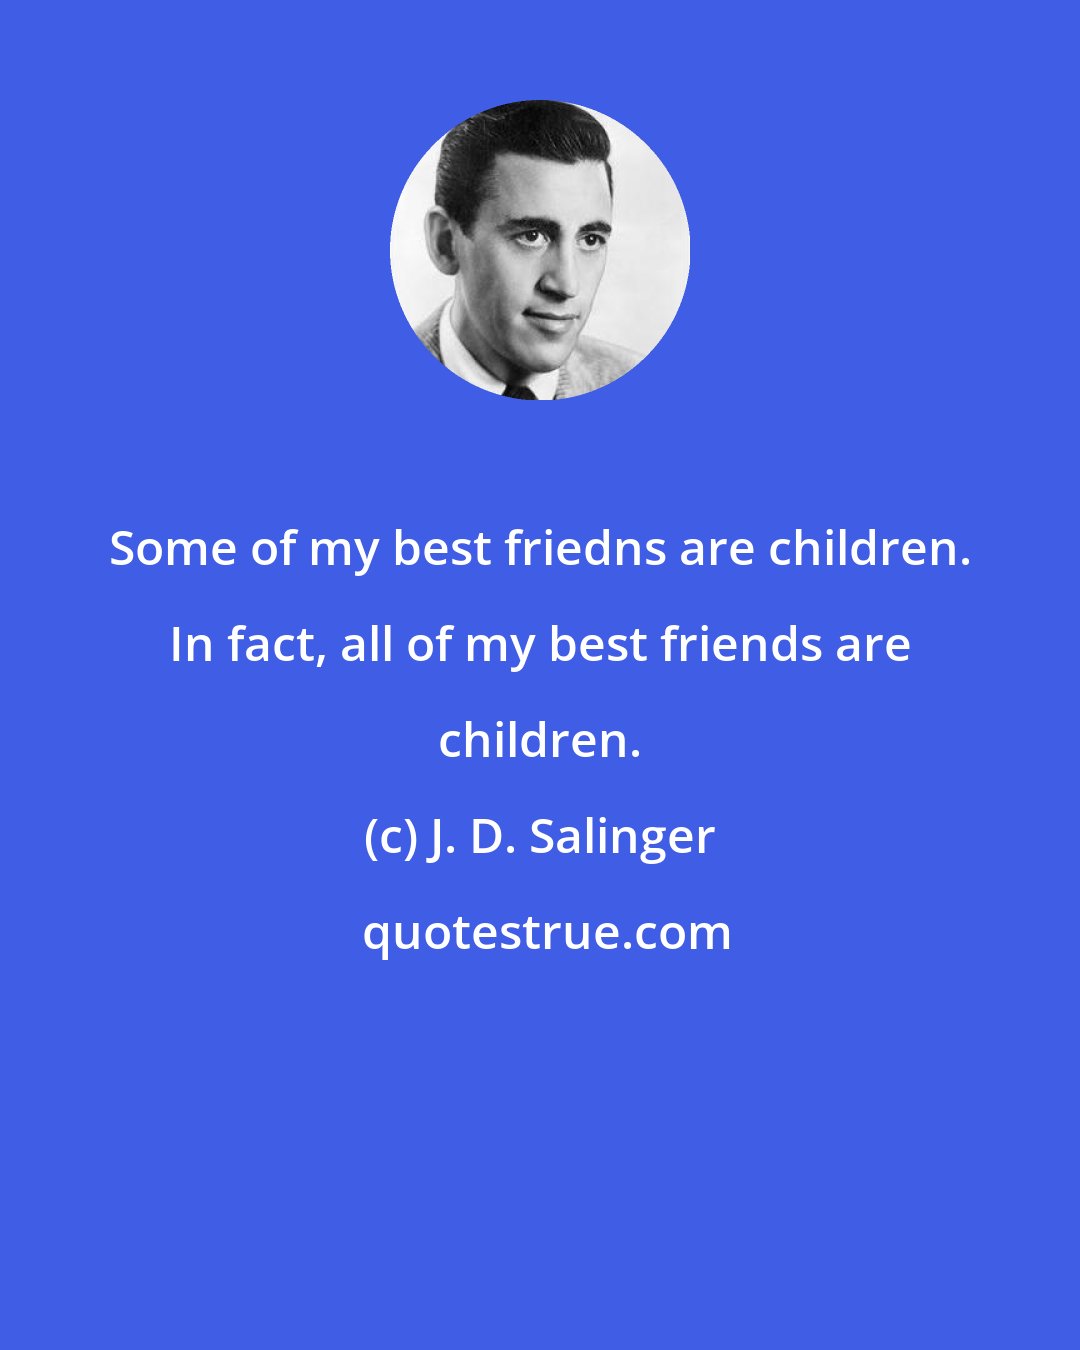 J. D. Salinger: Some of my best friedns are children. In fact, all of my best friends are children.